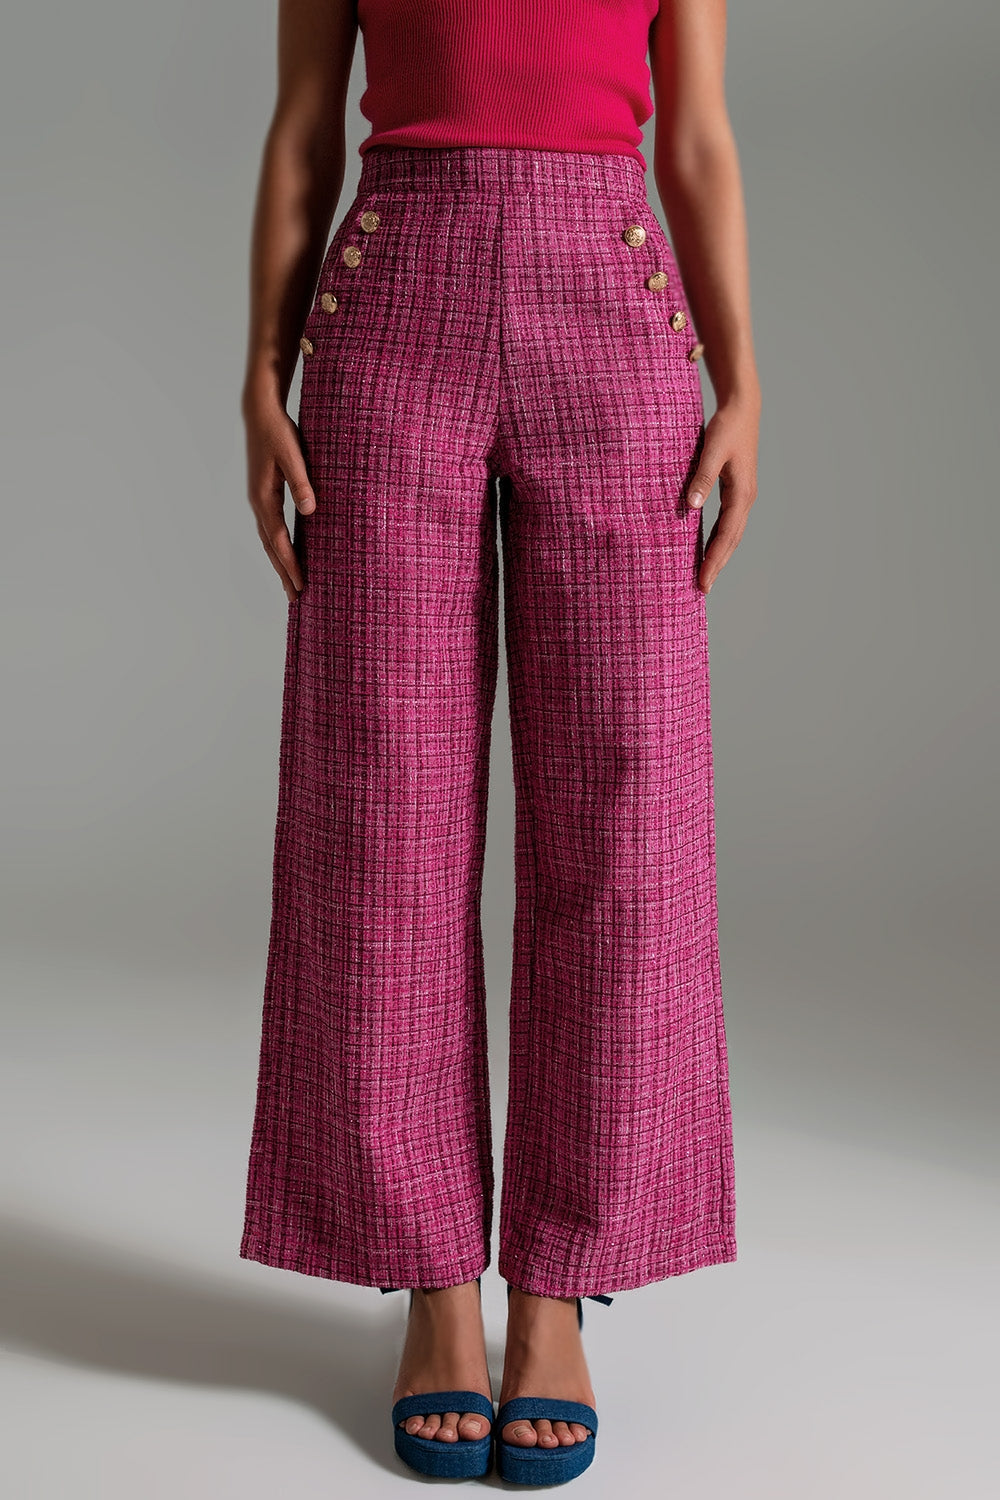 Q2 Tweed Marine Cut Pants With Button Details in Pink